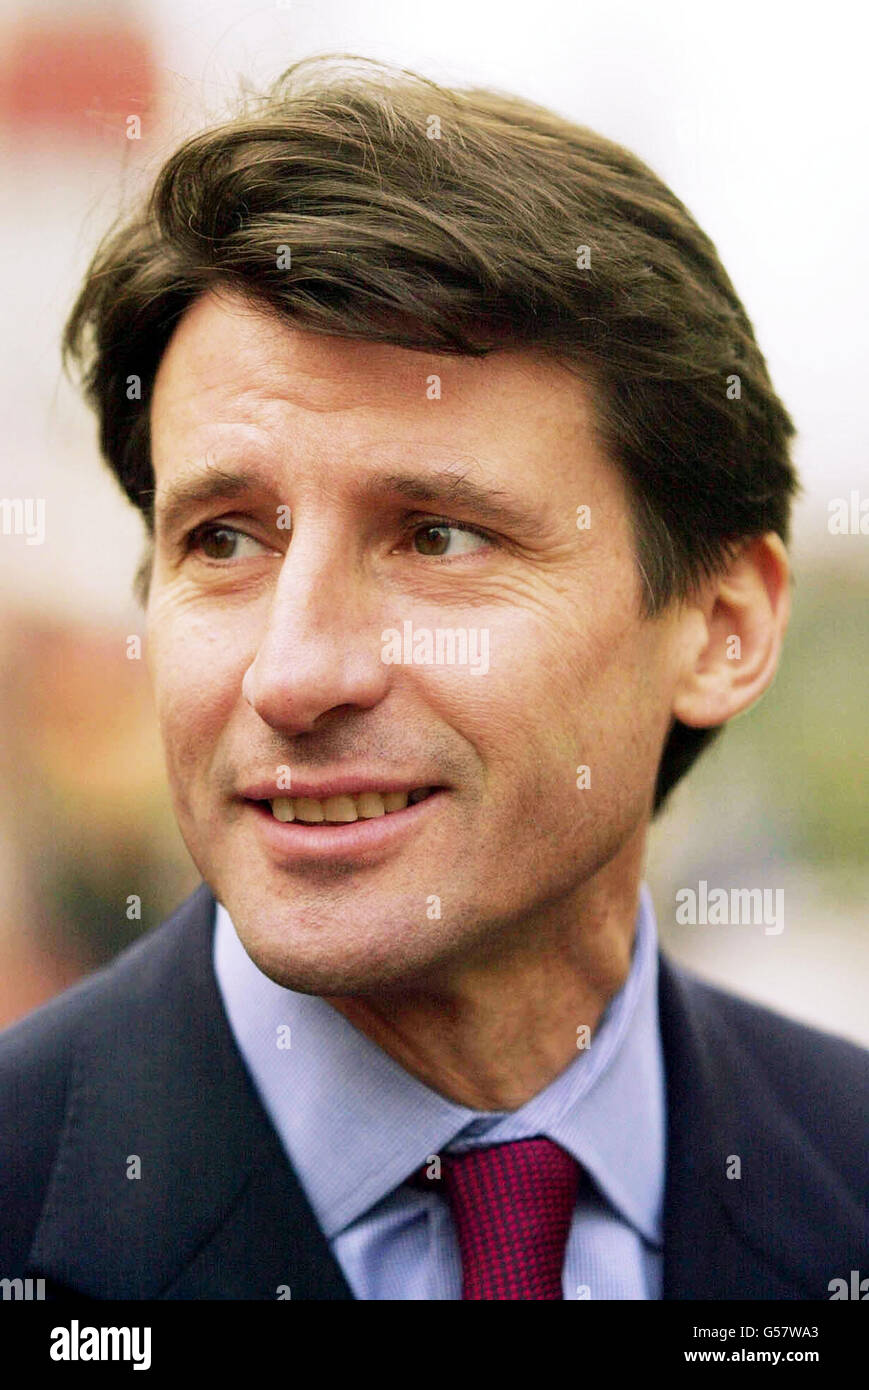 Former athlete, Lord Sebastian Coe, during a visit to Beeston, in Nottingham, where he accompanied Leader of the opposition Conservative Party William Hague on his visit to the area. * 14/2/2001: He has become embroiled in a war of words after claiming Linford Christie's time as British athletic captain was marred by 'continual conflict'. Coe, in his Daily Telegraph column, described Christie's behaviour as 'boorish' and claimed he was only made British team captain to buy officials some peace. The former athlete, who won two Olympic titles during the 1980s, also said that he thought Christie Stock Photo